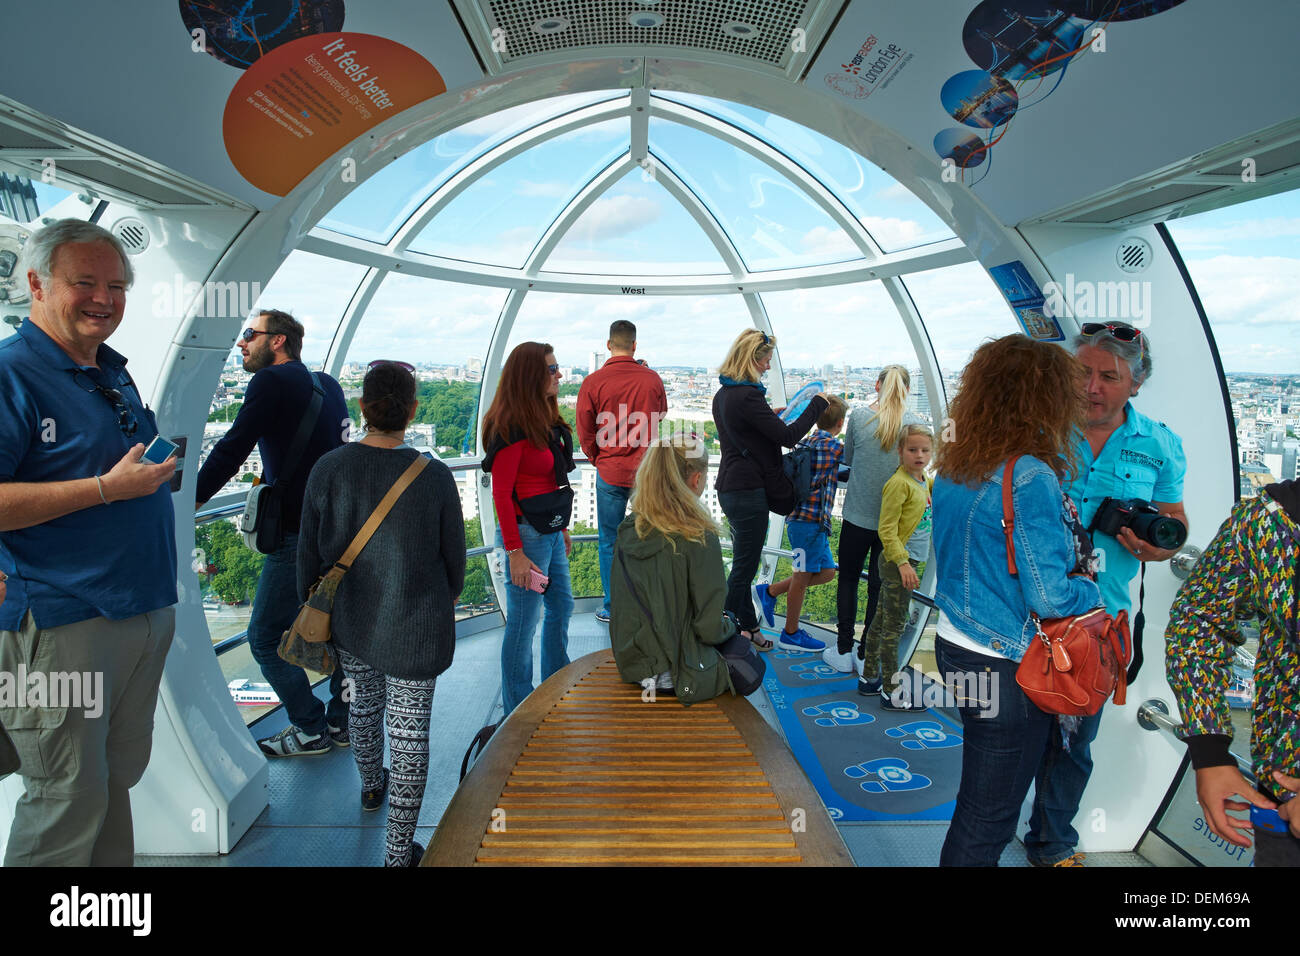 Inside A Capsule On The London Eye County Hall Westminster